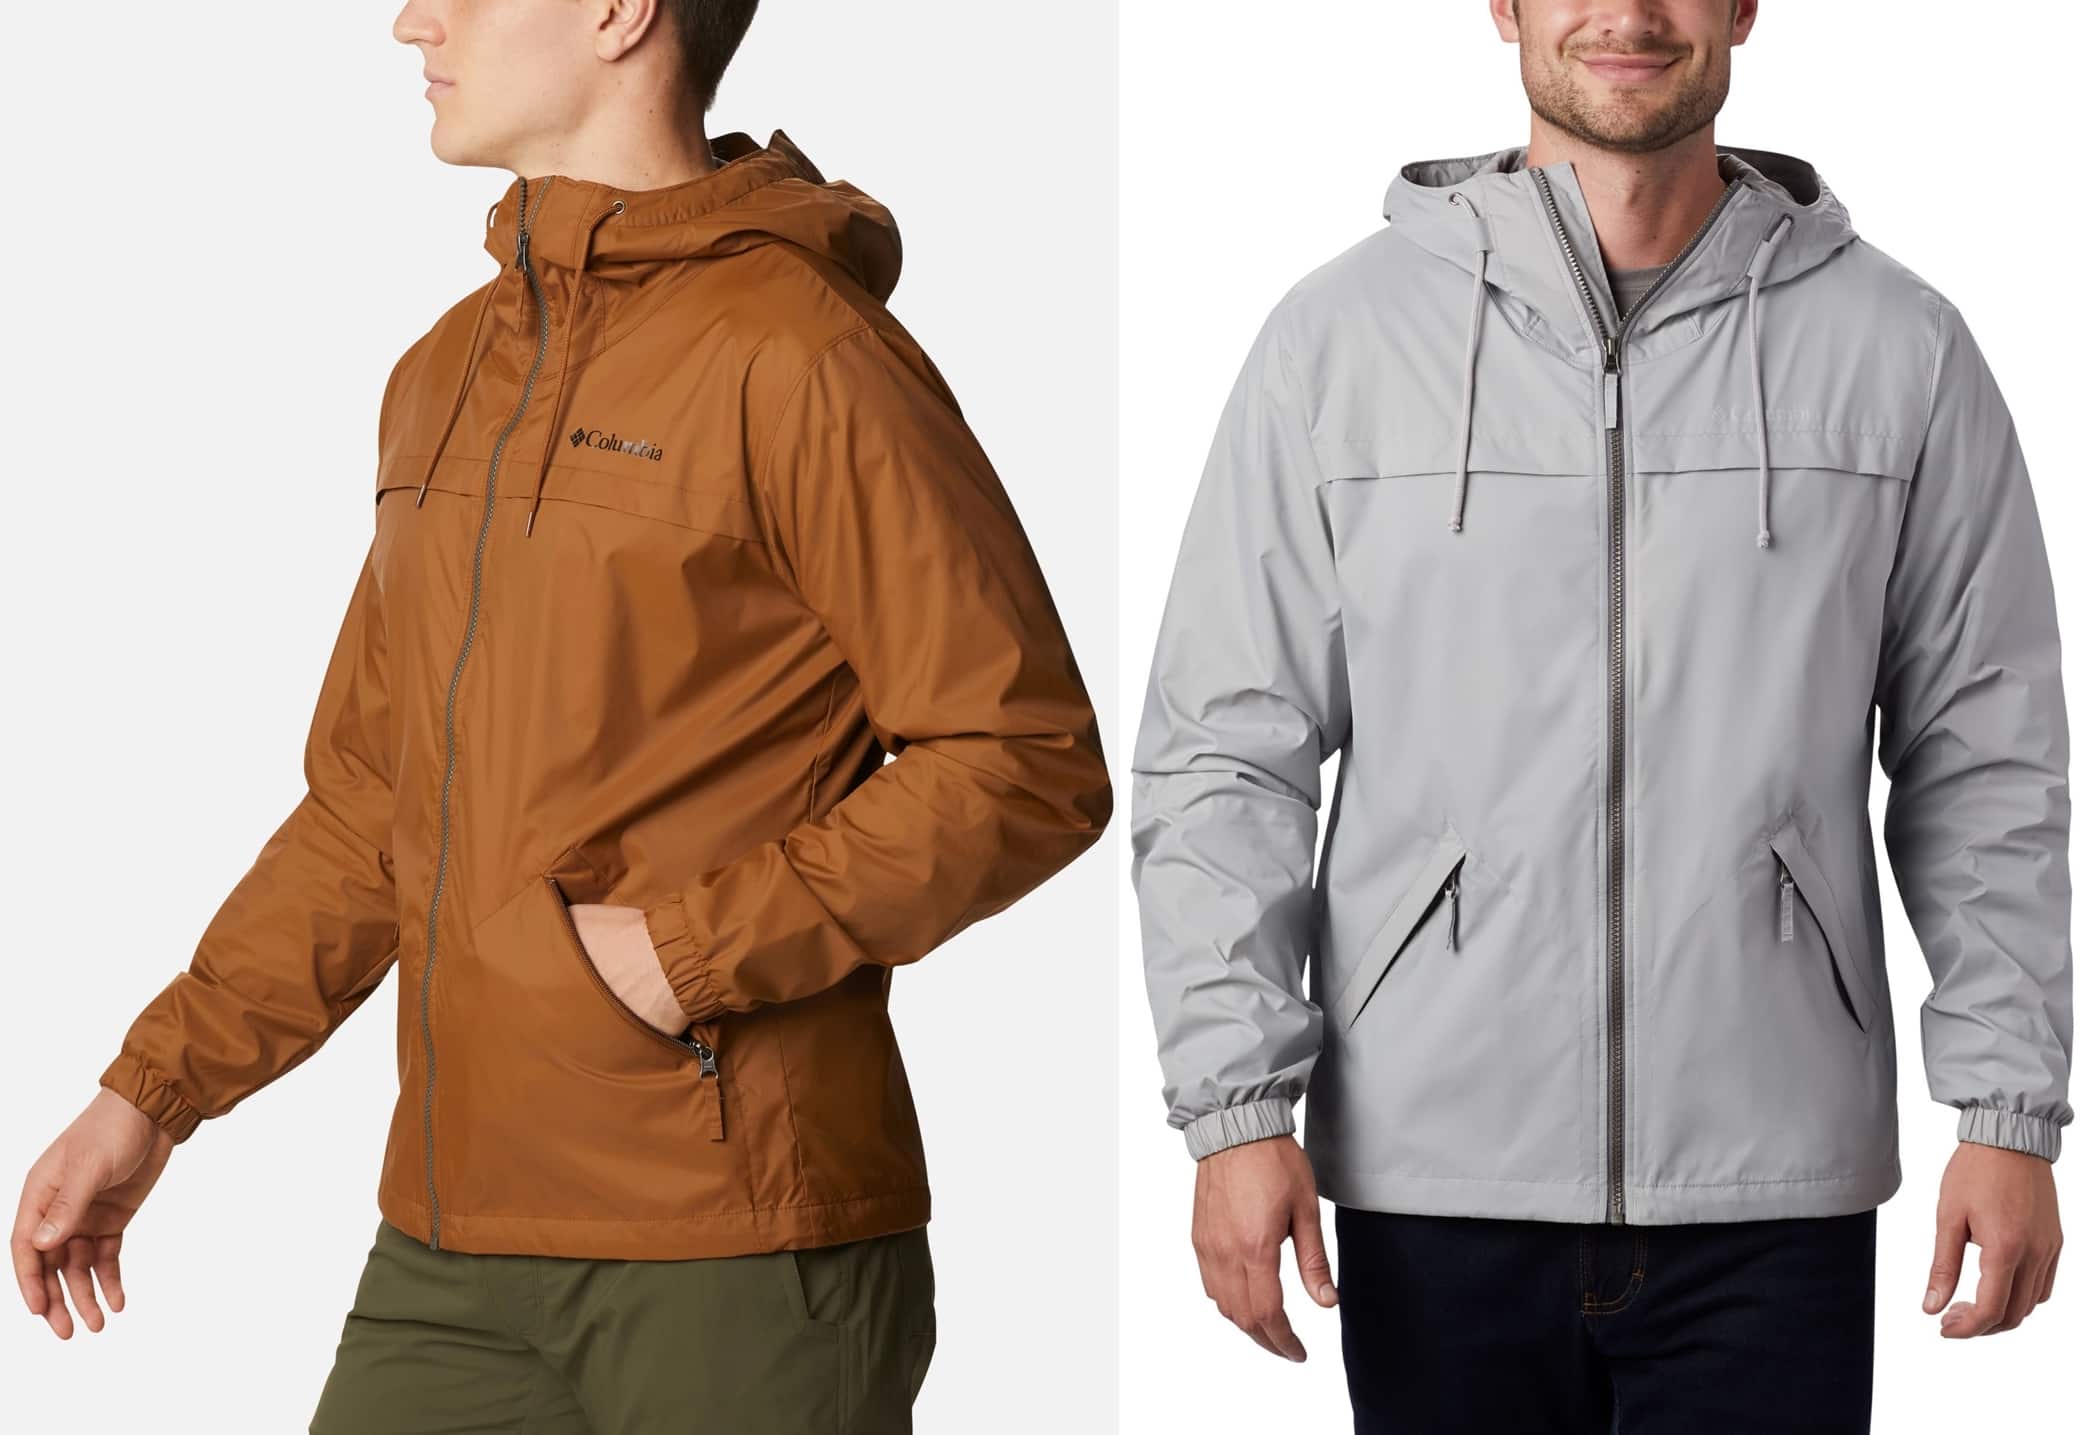 Perfect for drippy weather, this rain jacket helps protect you from the elements on the trail, around the campsite, or out on the patio